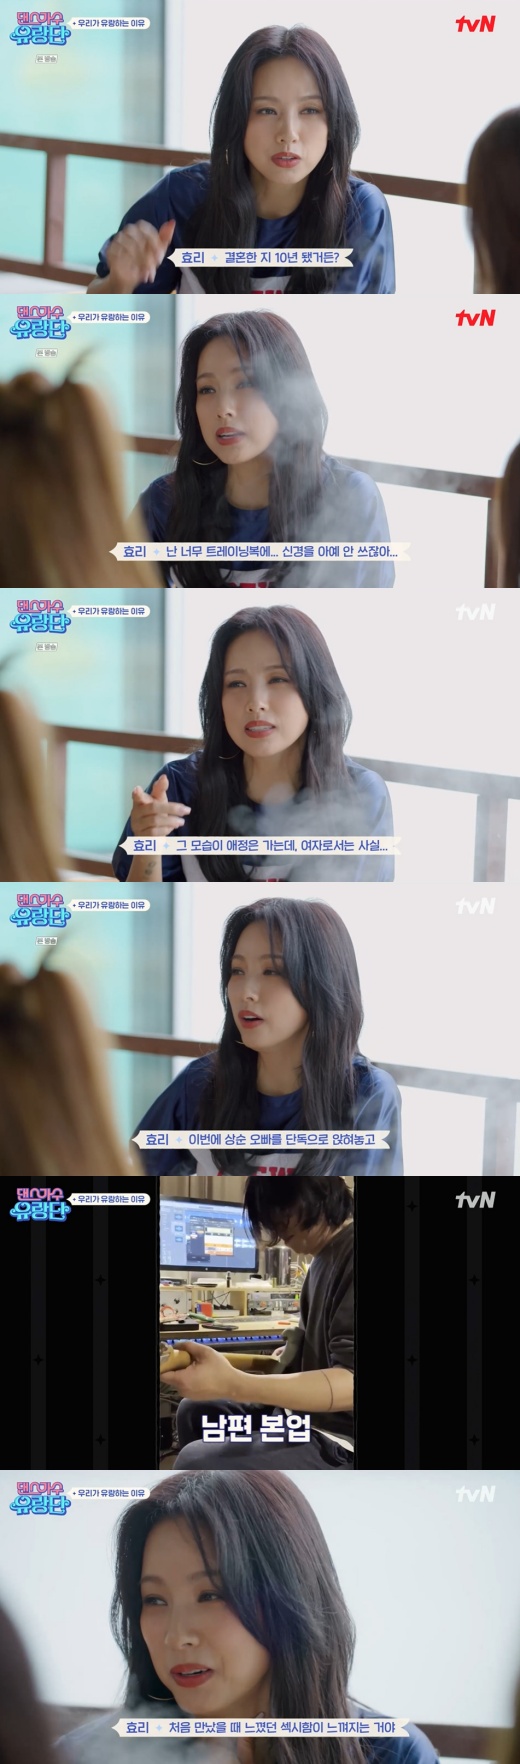 Singer Lee Hyori said she wants to perform a sexy show just for her husband Lee Sang-soon.On the cable channel tvN a dance troupe broadcasted on the 8th night, MC Hong Hyun-hee, Kim Wan-sun, Uhm Jung-hwa, Lee Hyori, Boa and Hwasa were drawn before departing for Yeosu and Gwangyang in Jeollanam-do.On this day, a wandering party talked about the theme, What if I only perform for one person? Lee Hyori said, I just cry when I hear the question.Ive been married for 10 years, Lee Hyori said. You know how I am. I dont care too much about my appearance in sportswear. Its affectionate, but as a woman, its true.I want to sit down with my older brother alone and kill him once, he said, cheering for a sexy performance.Lee Hyori said, This time I arrange my brother elek Guitar in Hwasa song arrangement. I hit elek Guitar, and I felt the sexy feeling when I first met. elek Guitar looks like a womans body.I wanted to cover it with a smile, he said.When asked, Did you attack him? he answered timidly, I couldnt do it because it was still awkward. Im pulling him up.